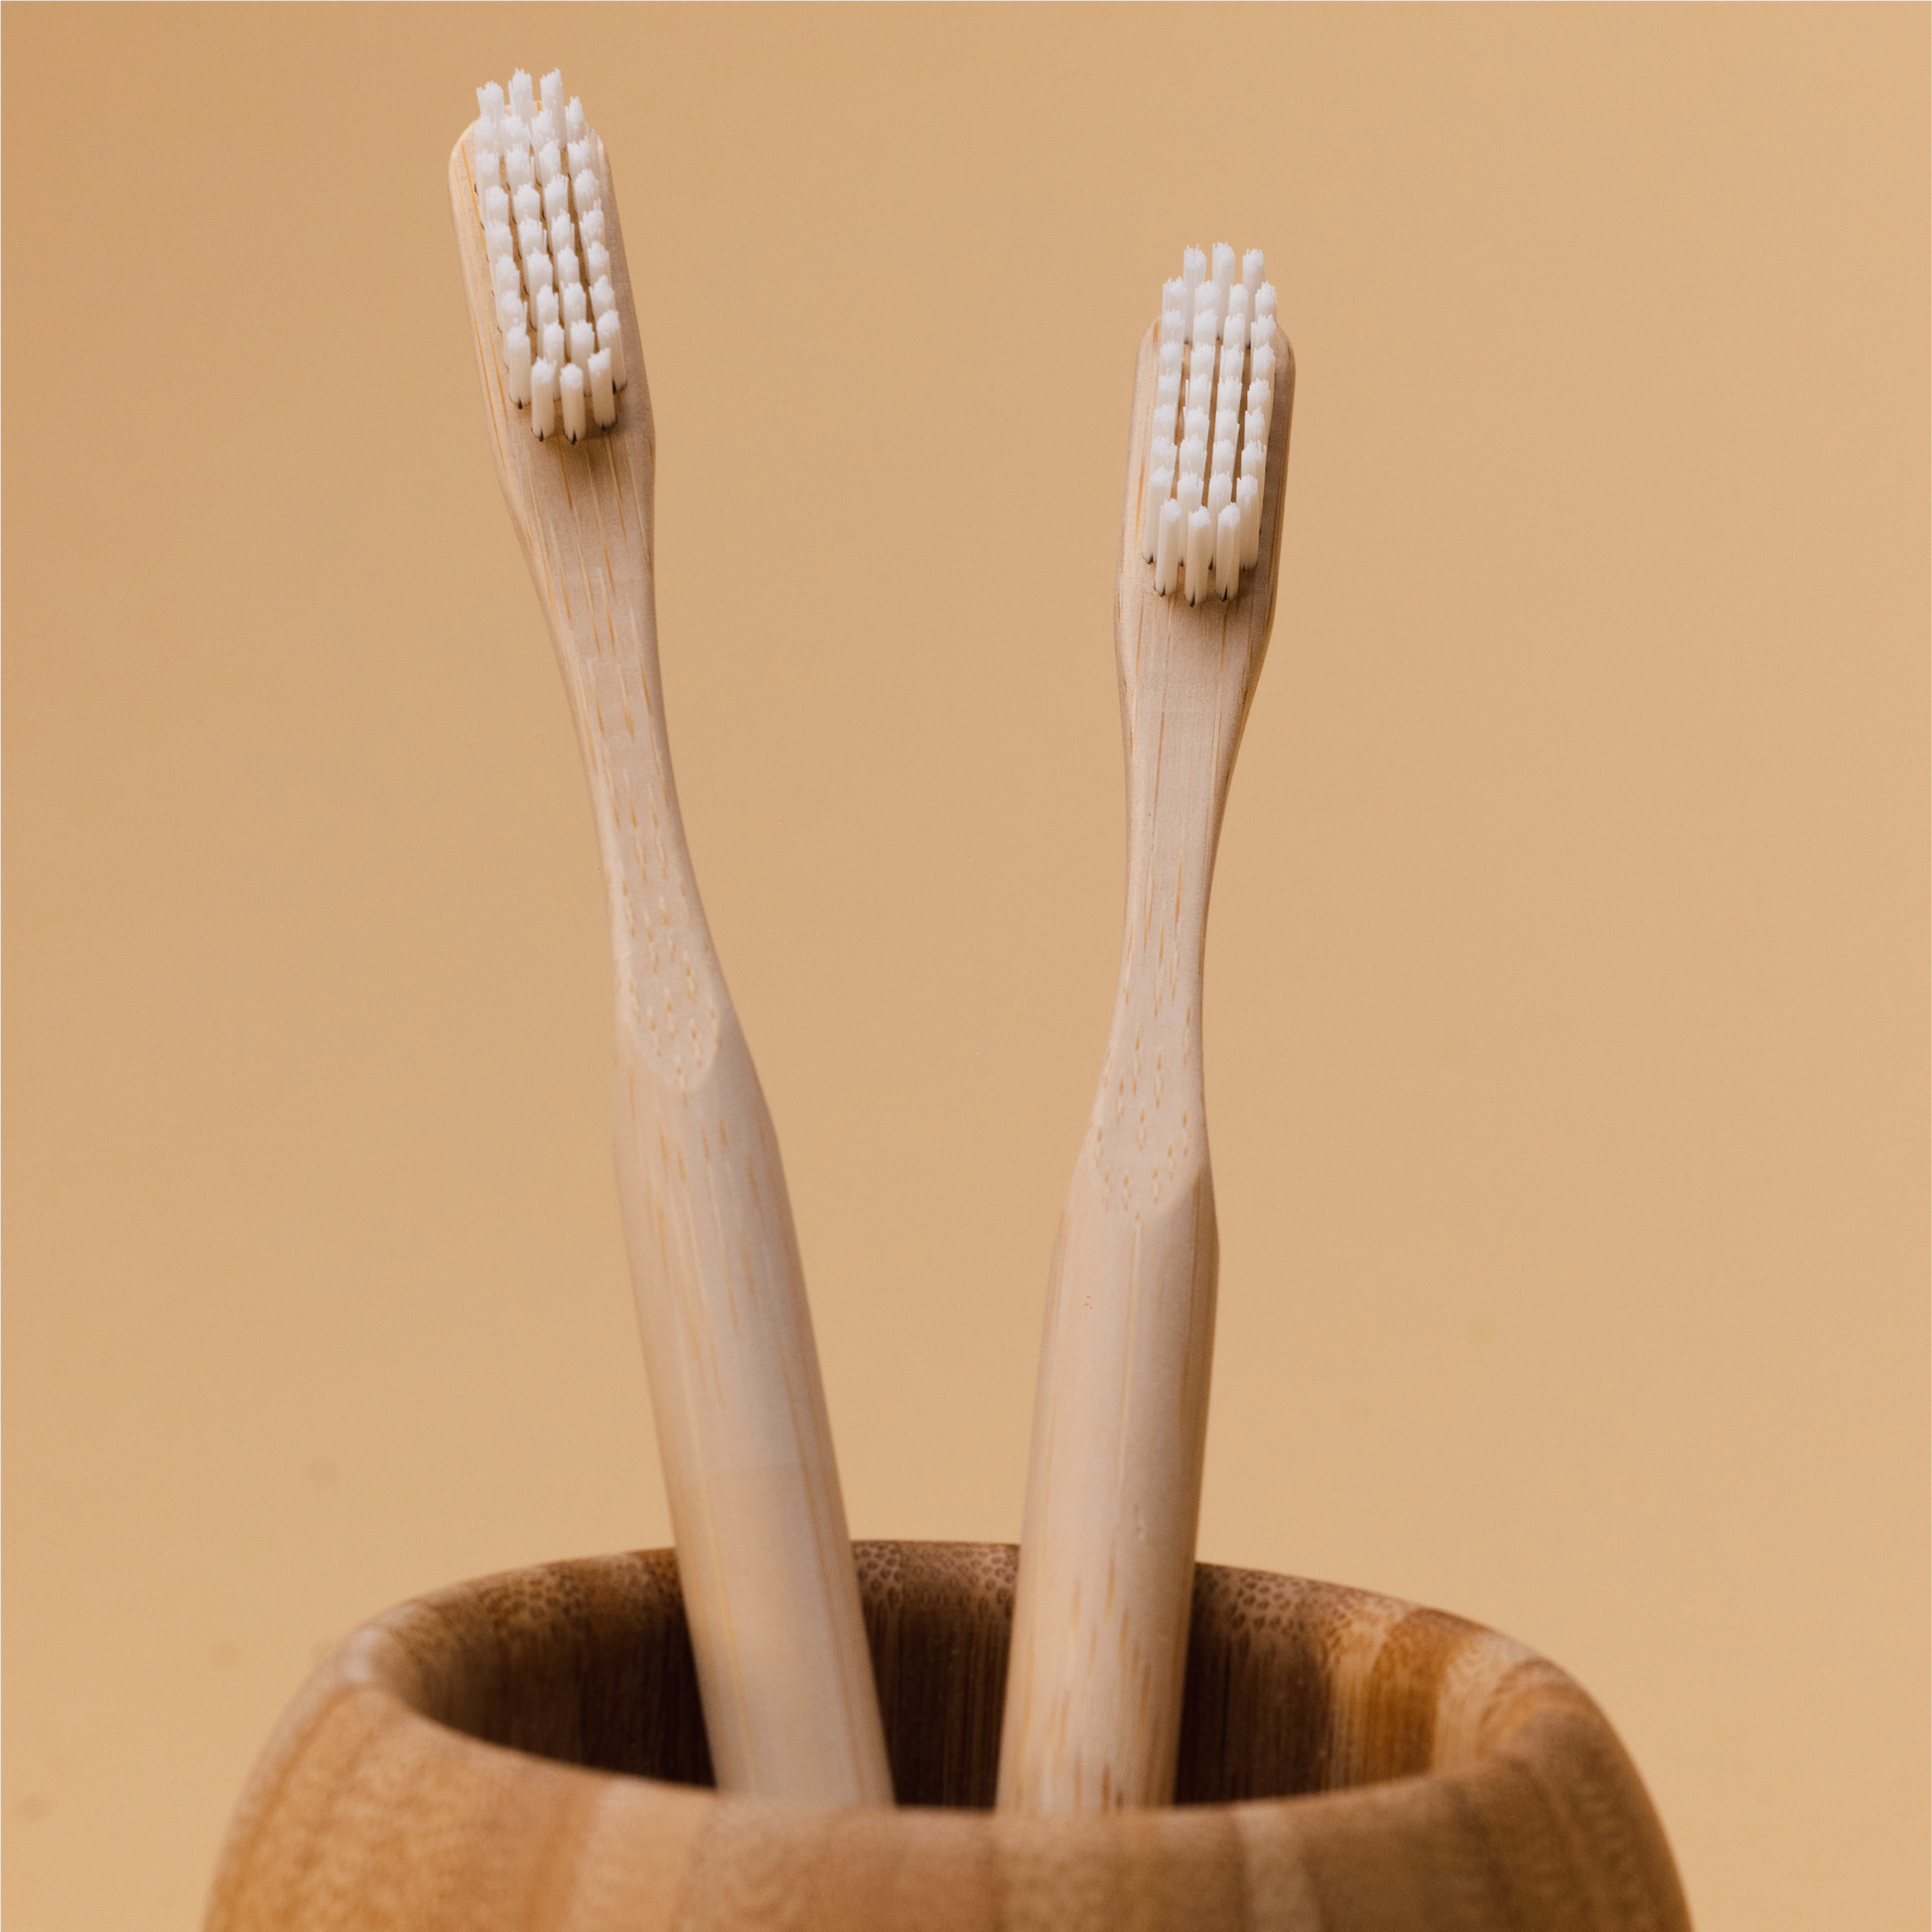 Sustainable Dental Kit with biodegradable bamboo toothbrushes and floss, top angle